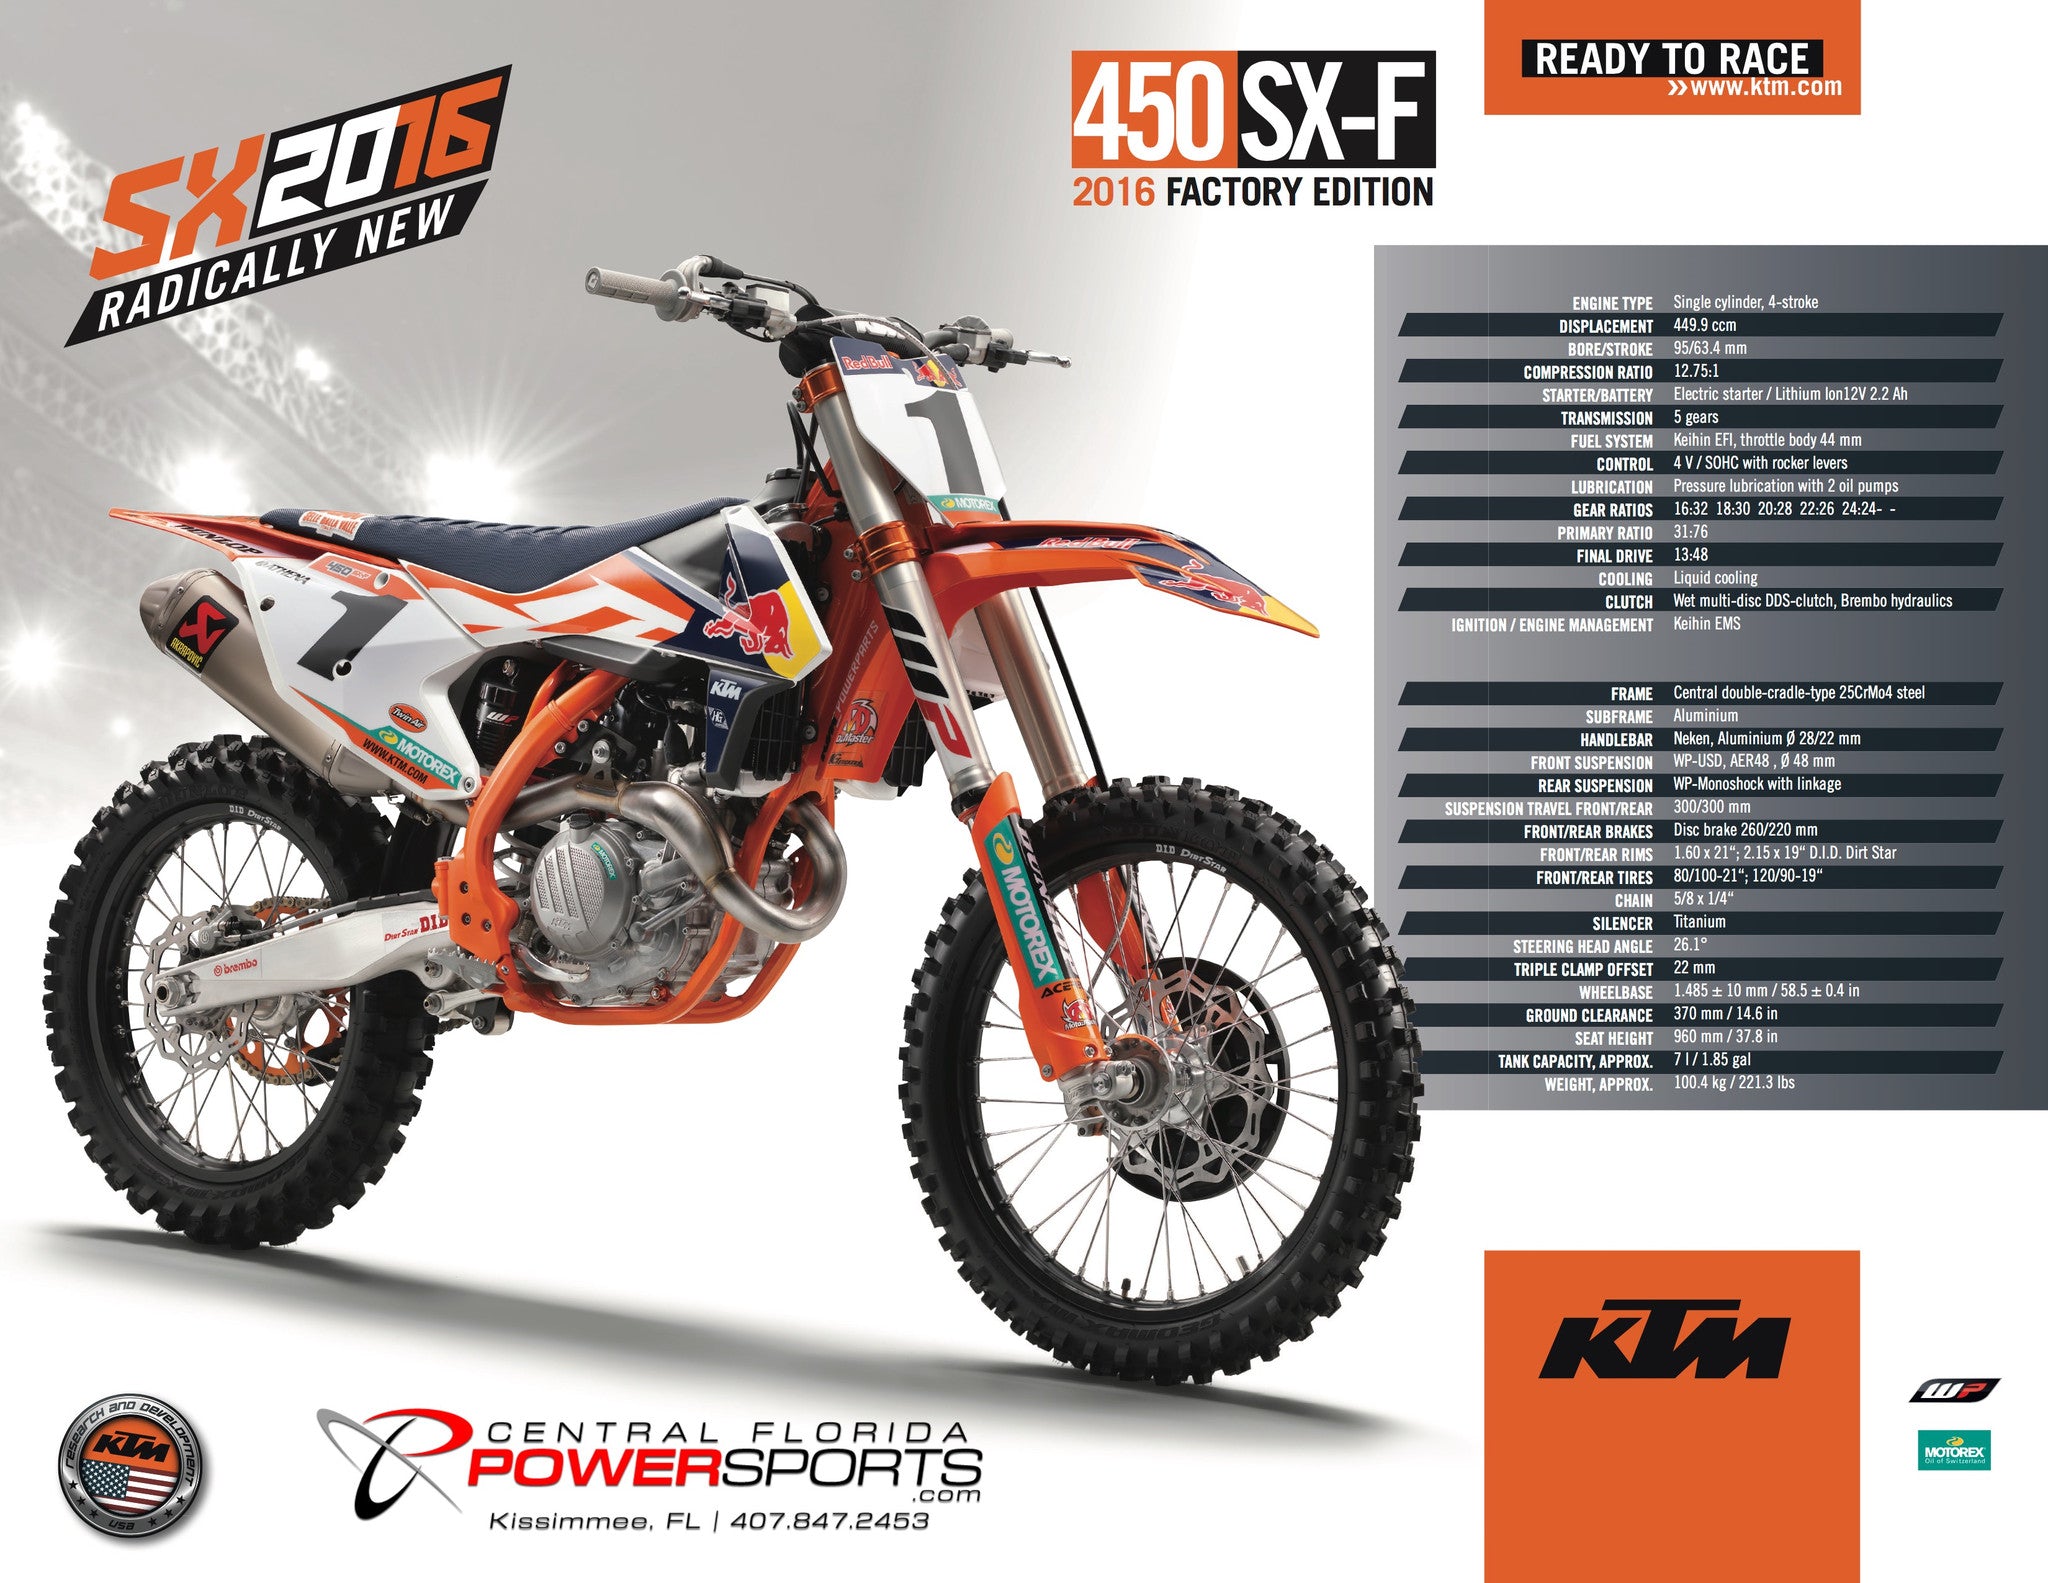 2016 KTM Factory Editions Announced